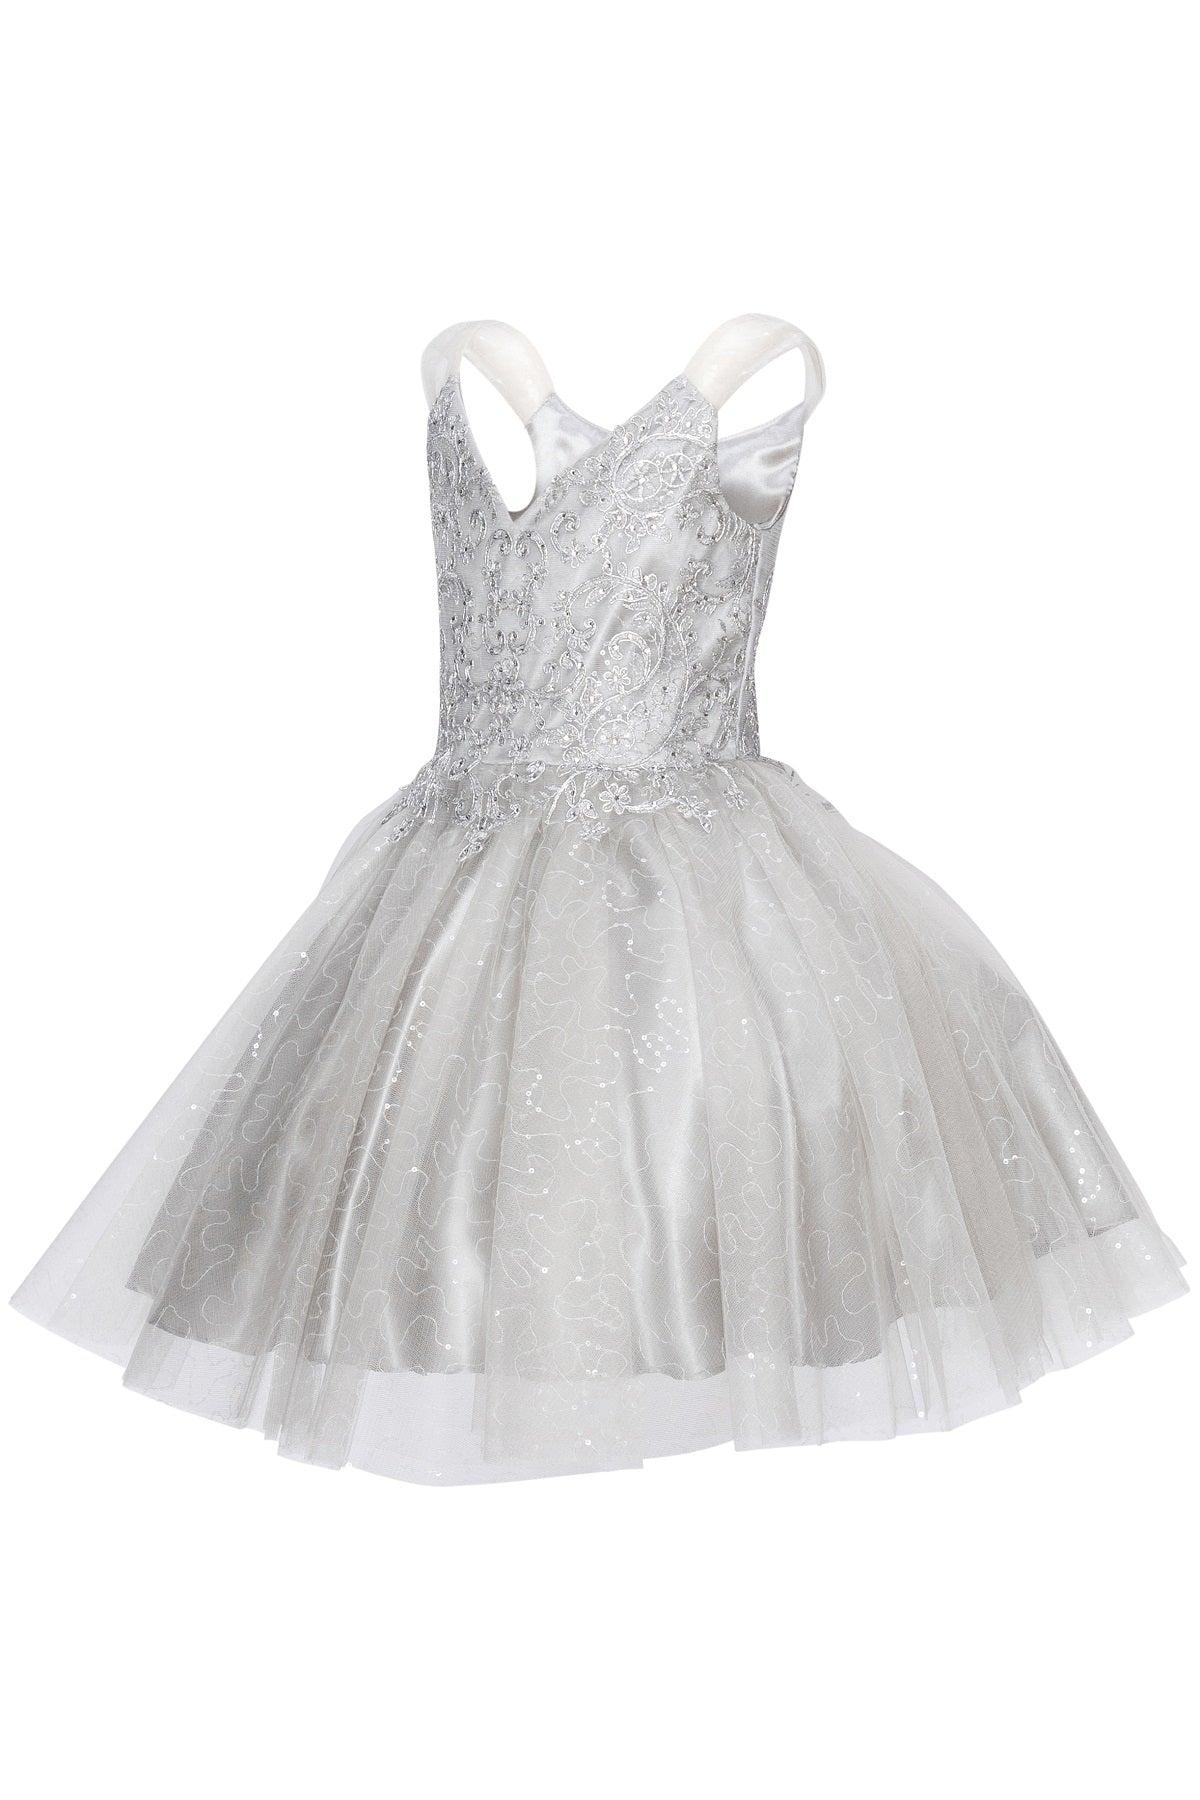 Satin Tulle Party Dress by Cinderella Couture USA 5104